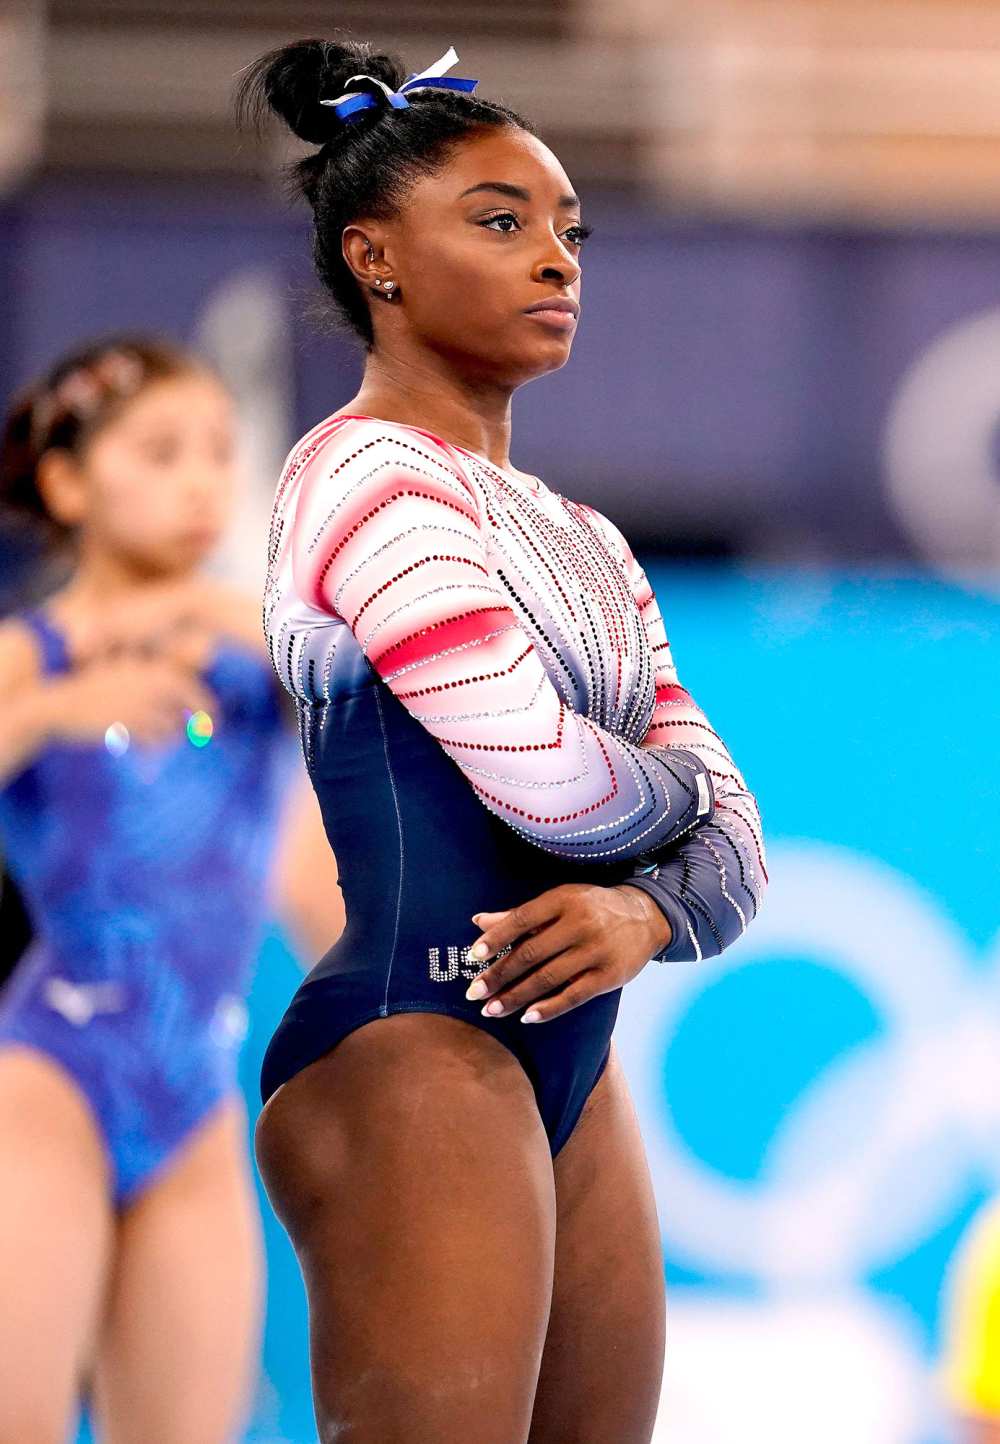 Simone Biles Believes Past Abuse Suffered at the Hands of Larry Nassar Could Have Triggered Her at the Tokyo Olympics